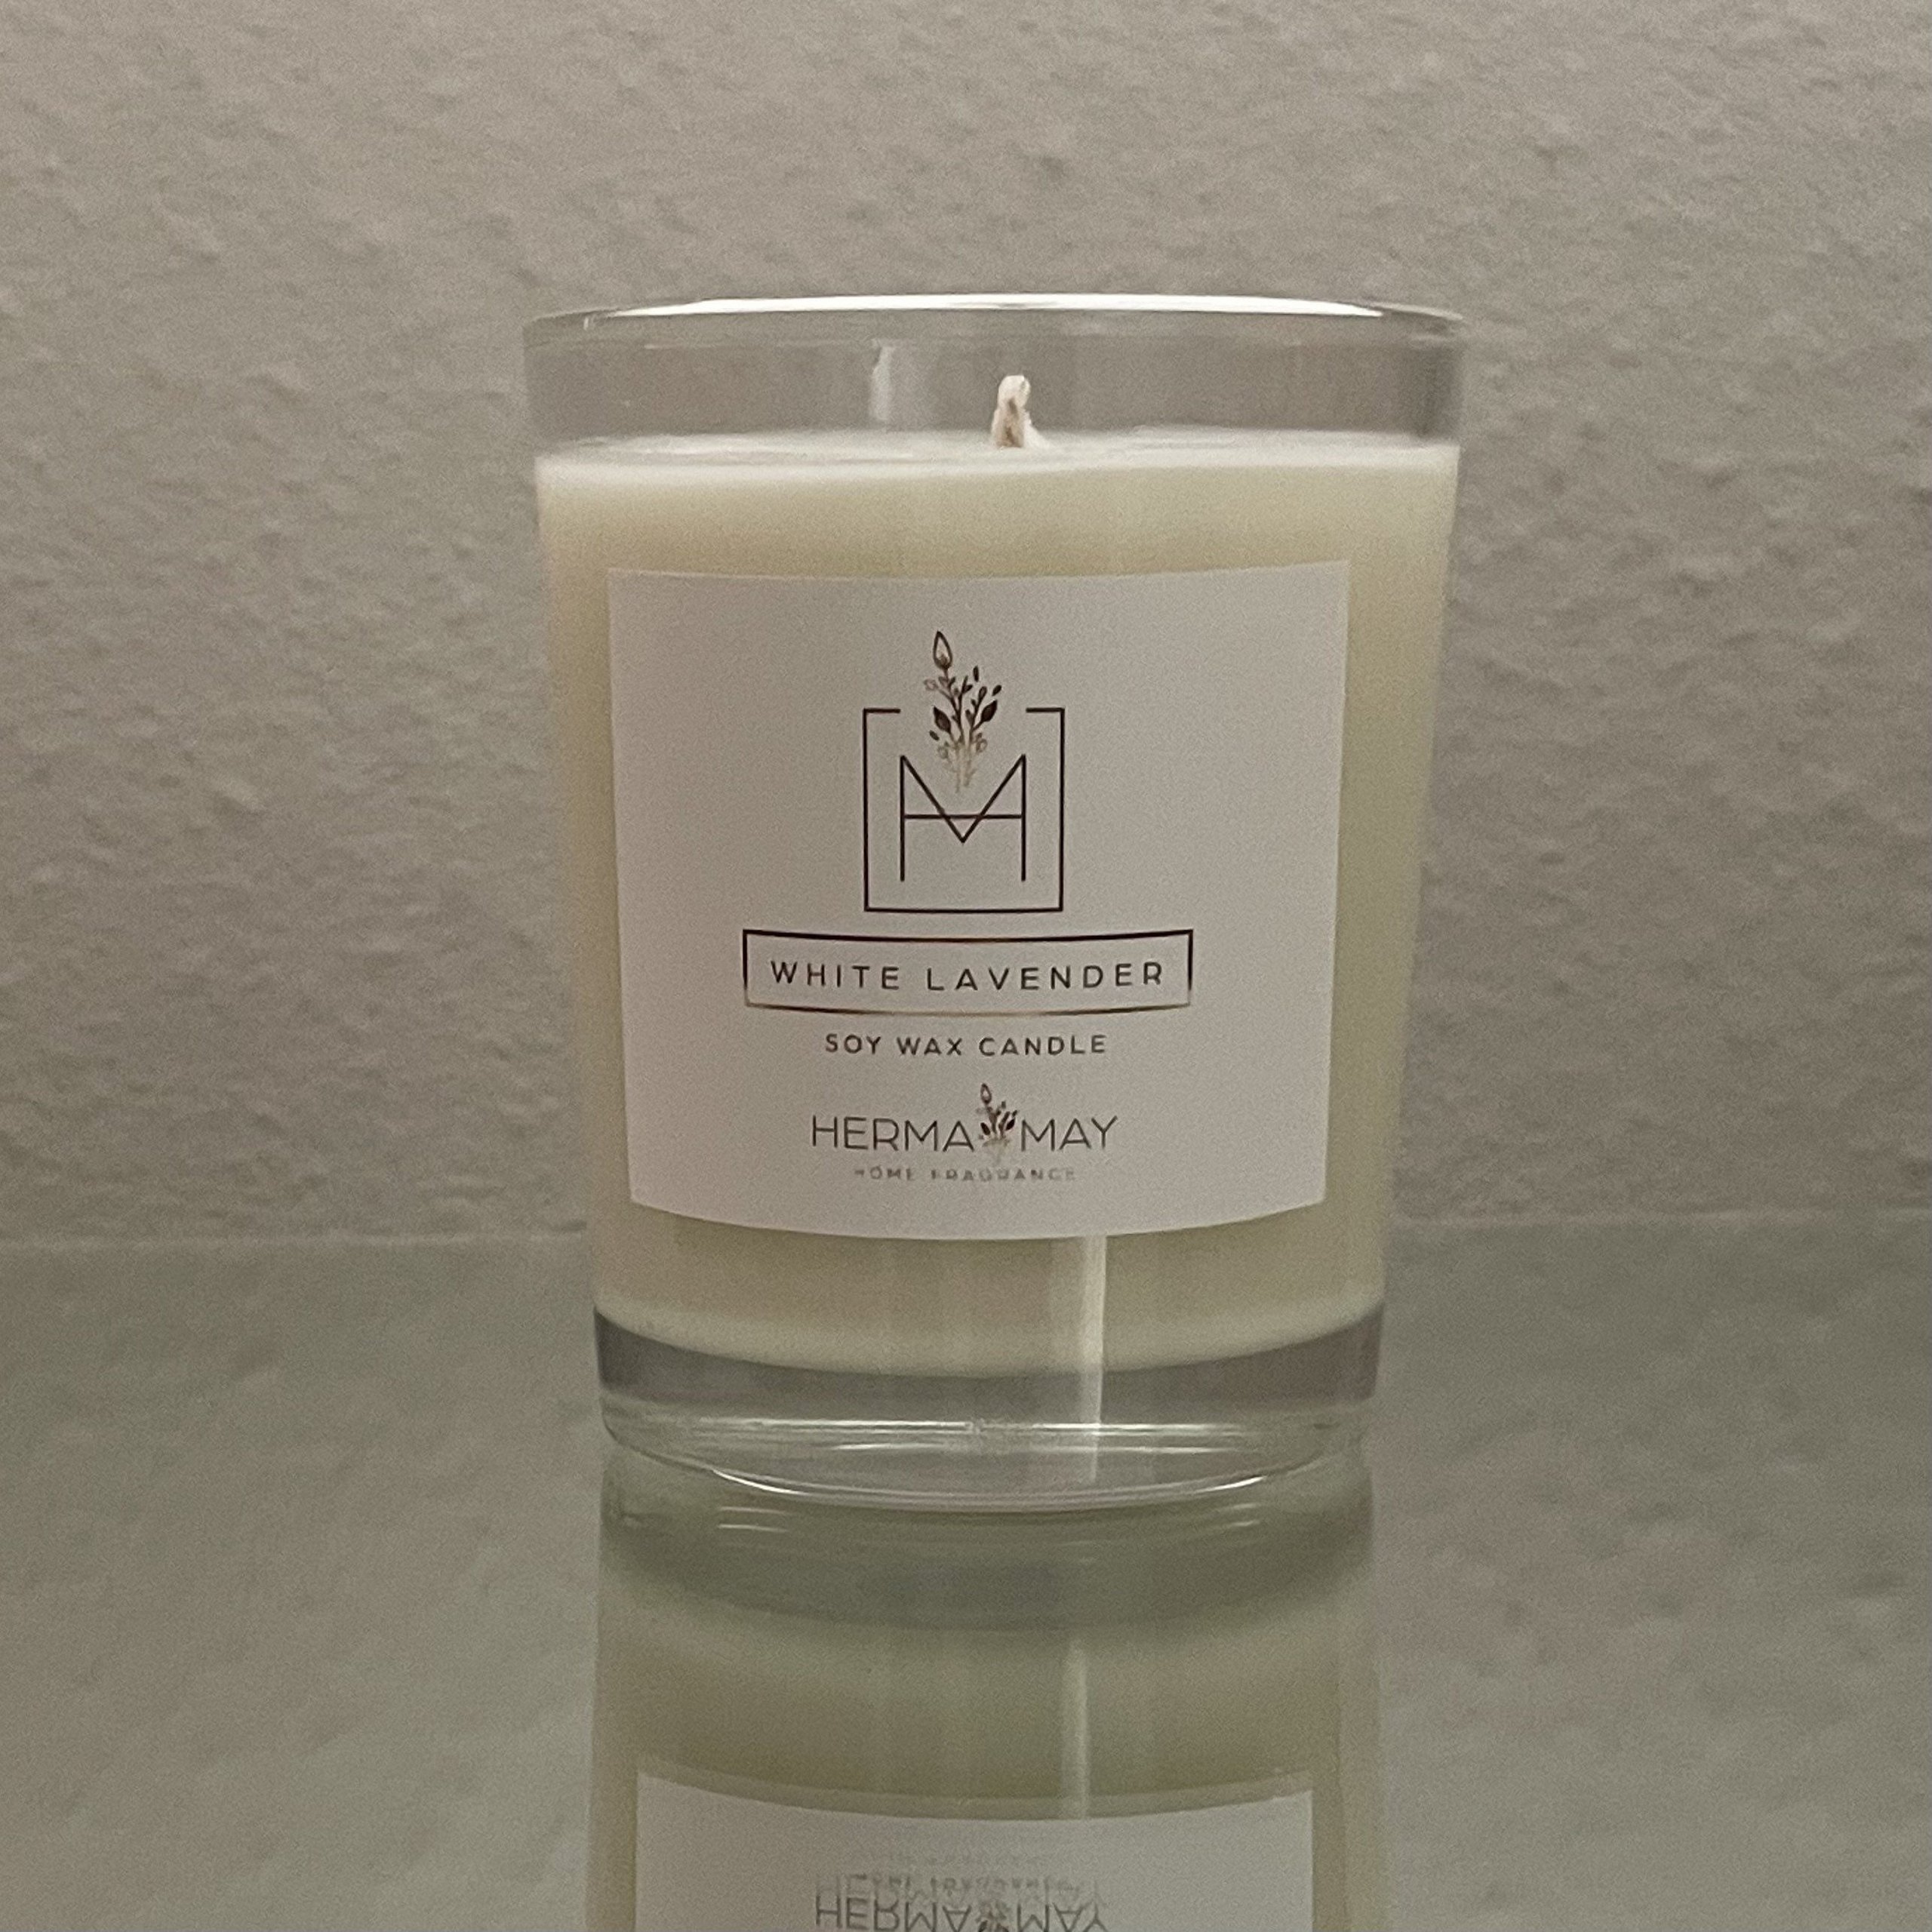 White Lavender Soy Wax Candle